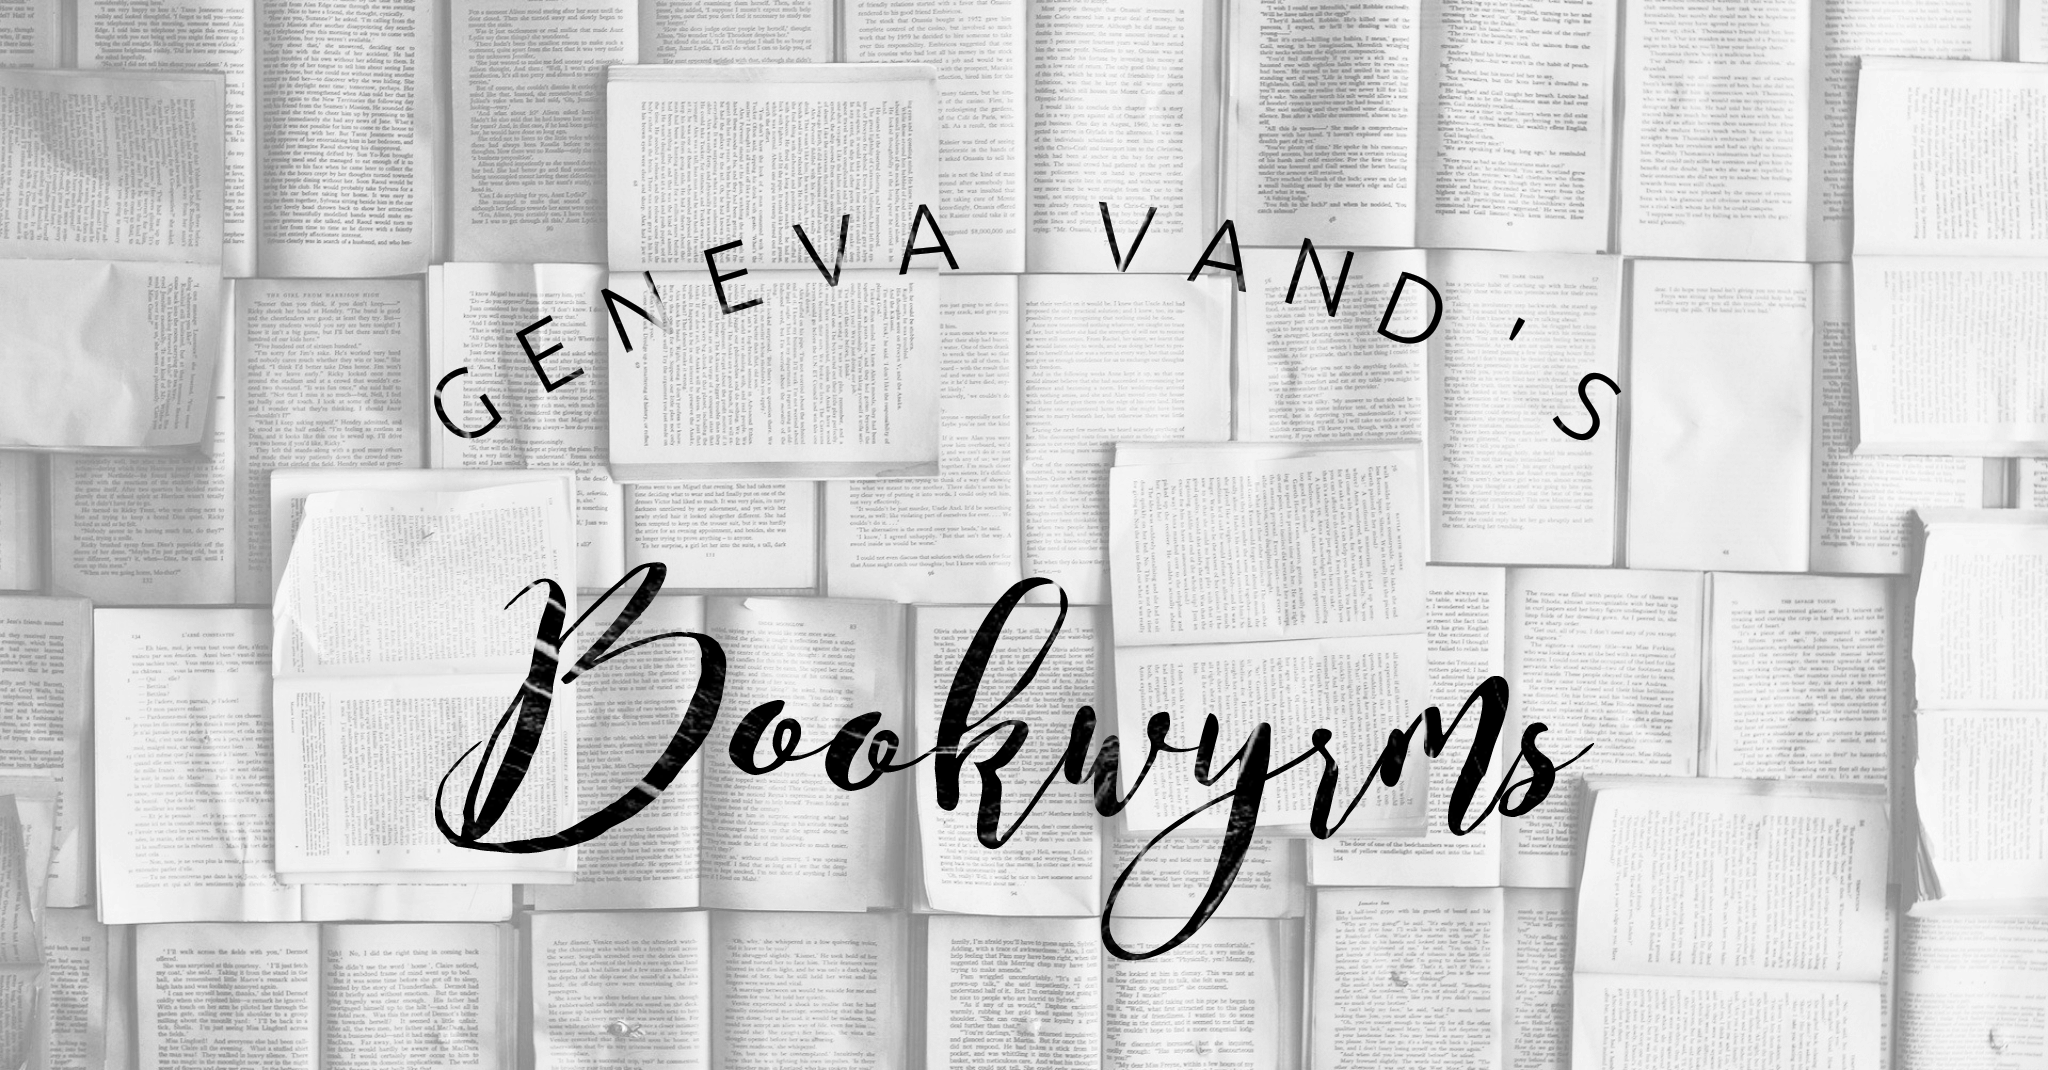 black and white image of open books, overlaid with text saying "Geneva Vand's Bookwyrms"